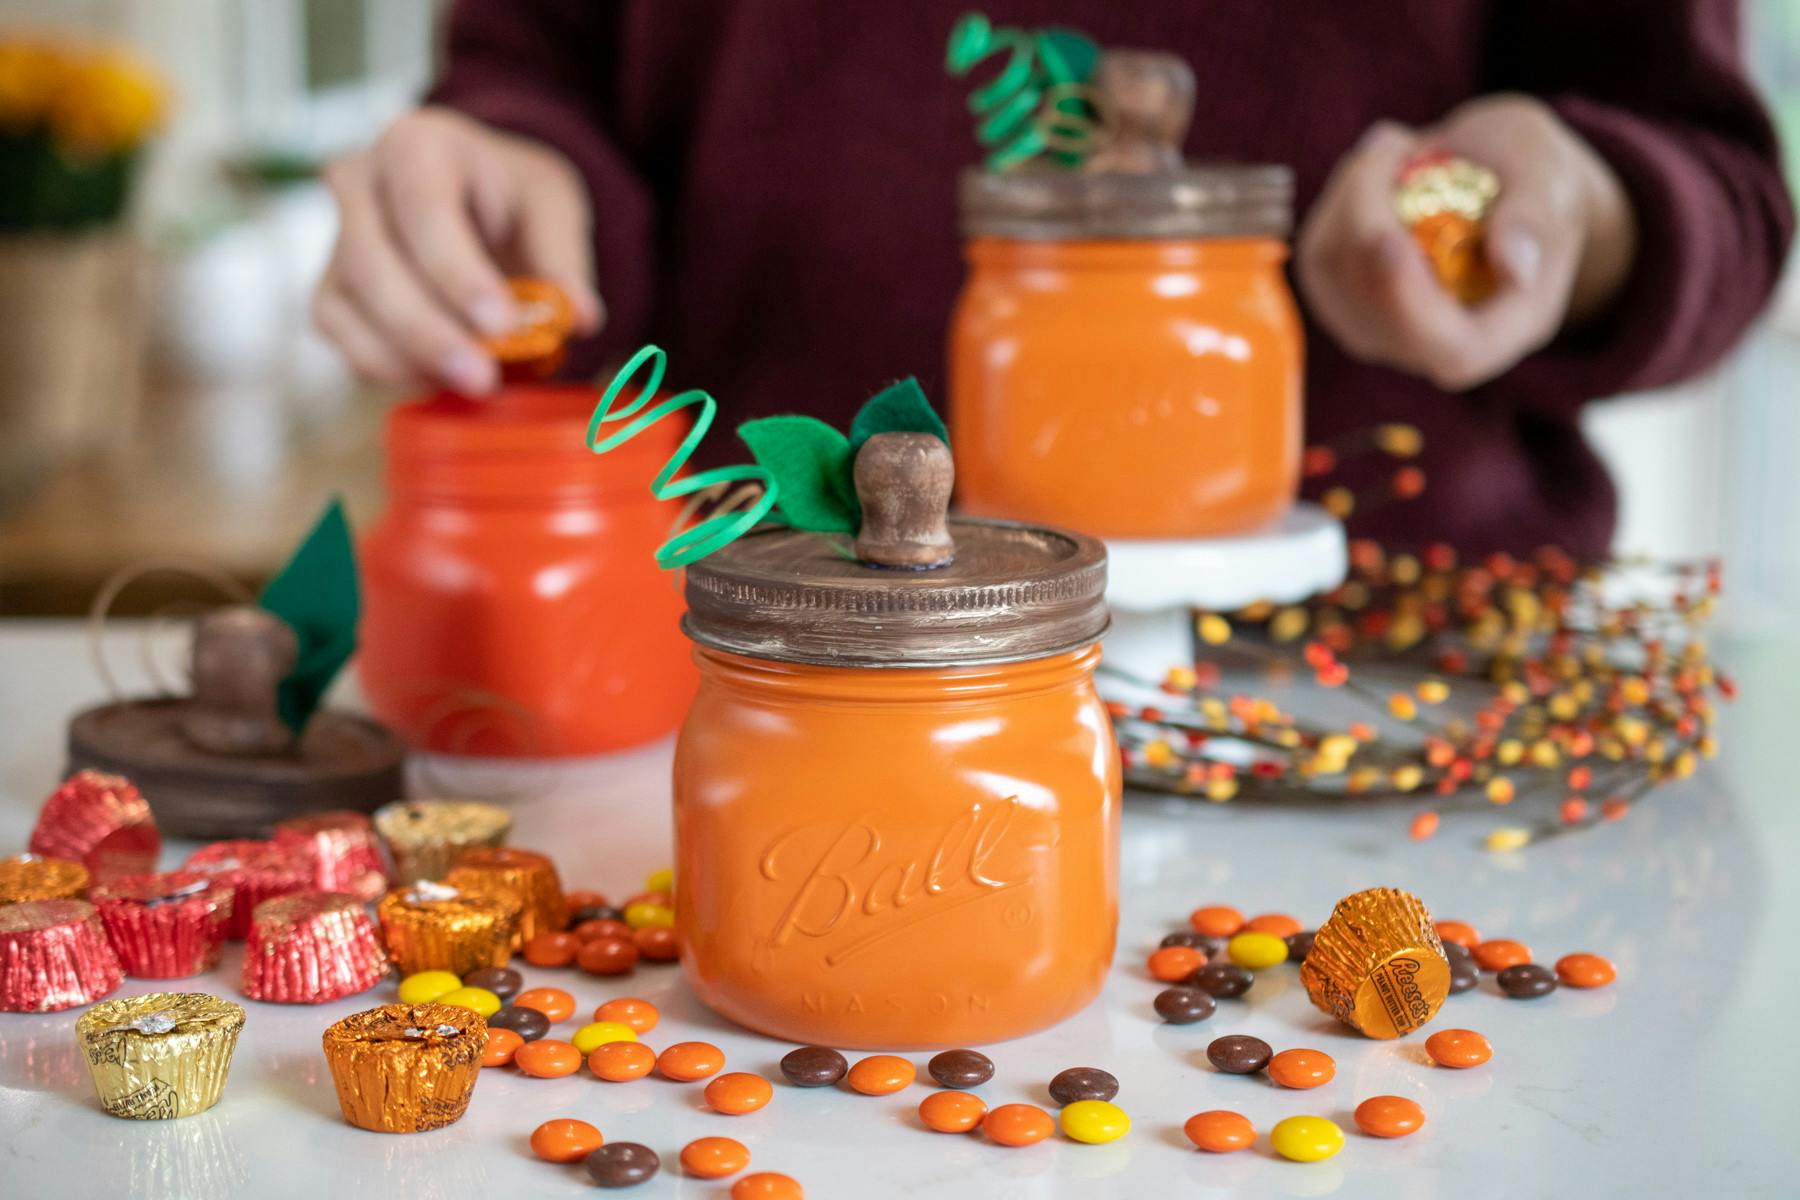 A person putting candy into mason jars that have been decorated to look like pumpkins.